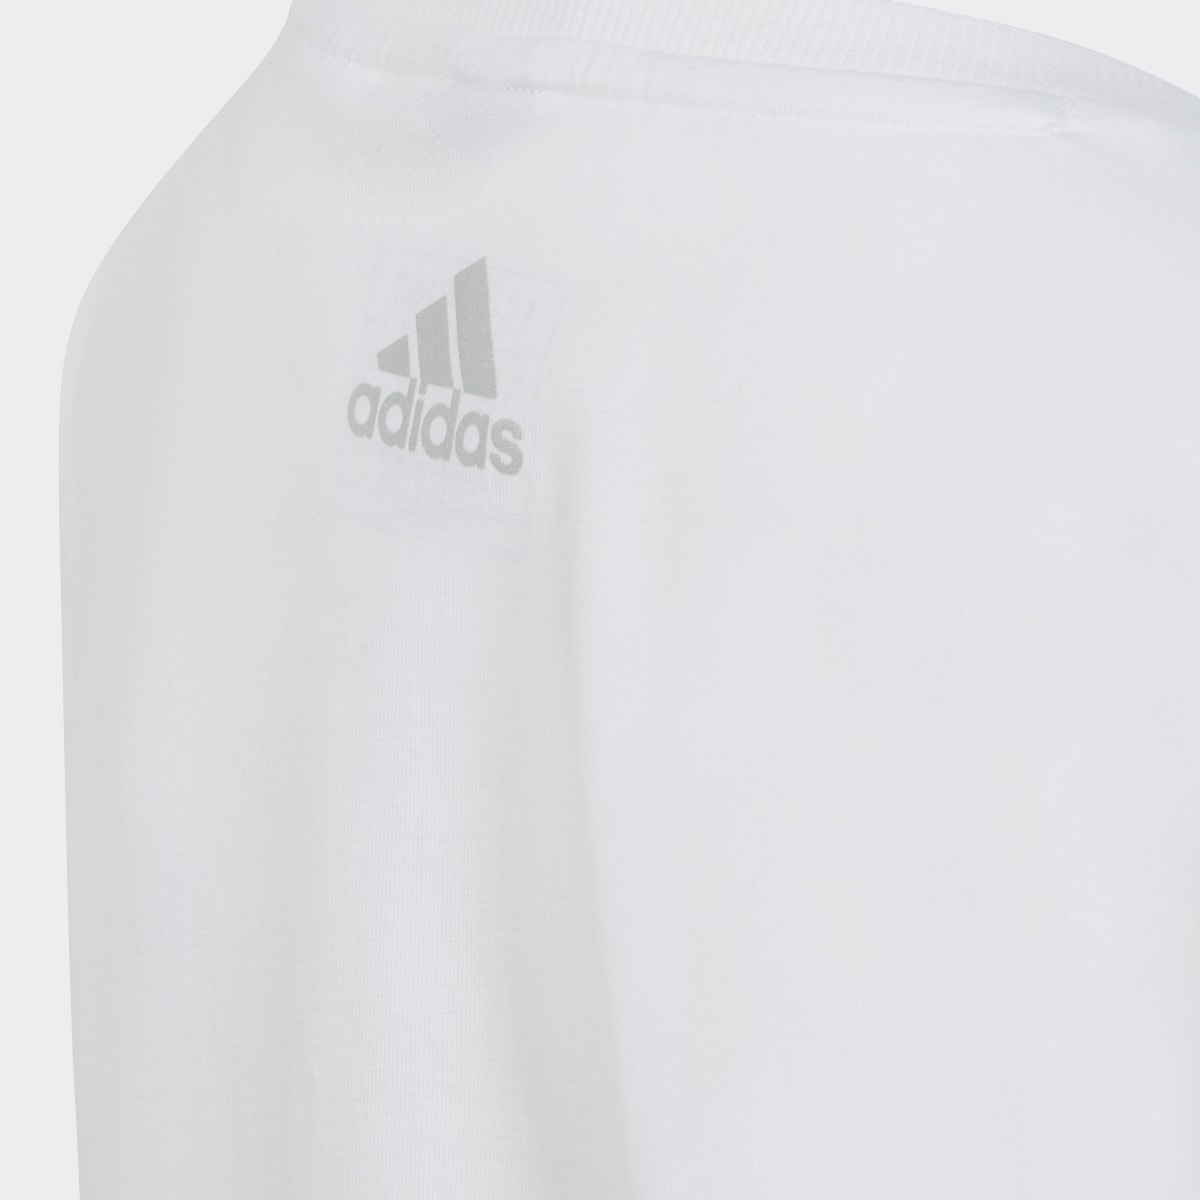 Adidas Dance Knotted T-Shirt. 4